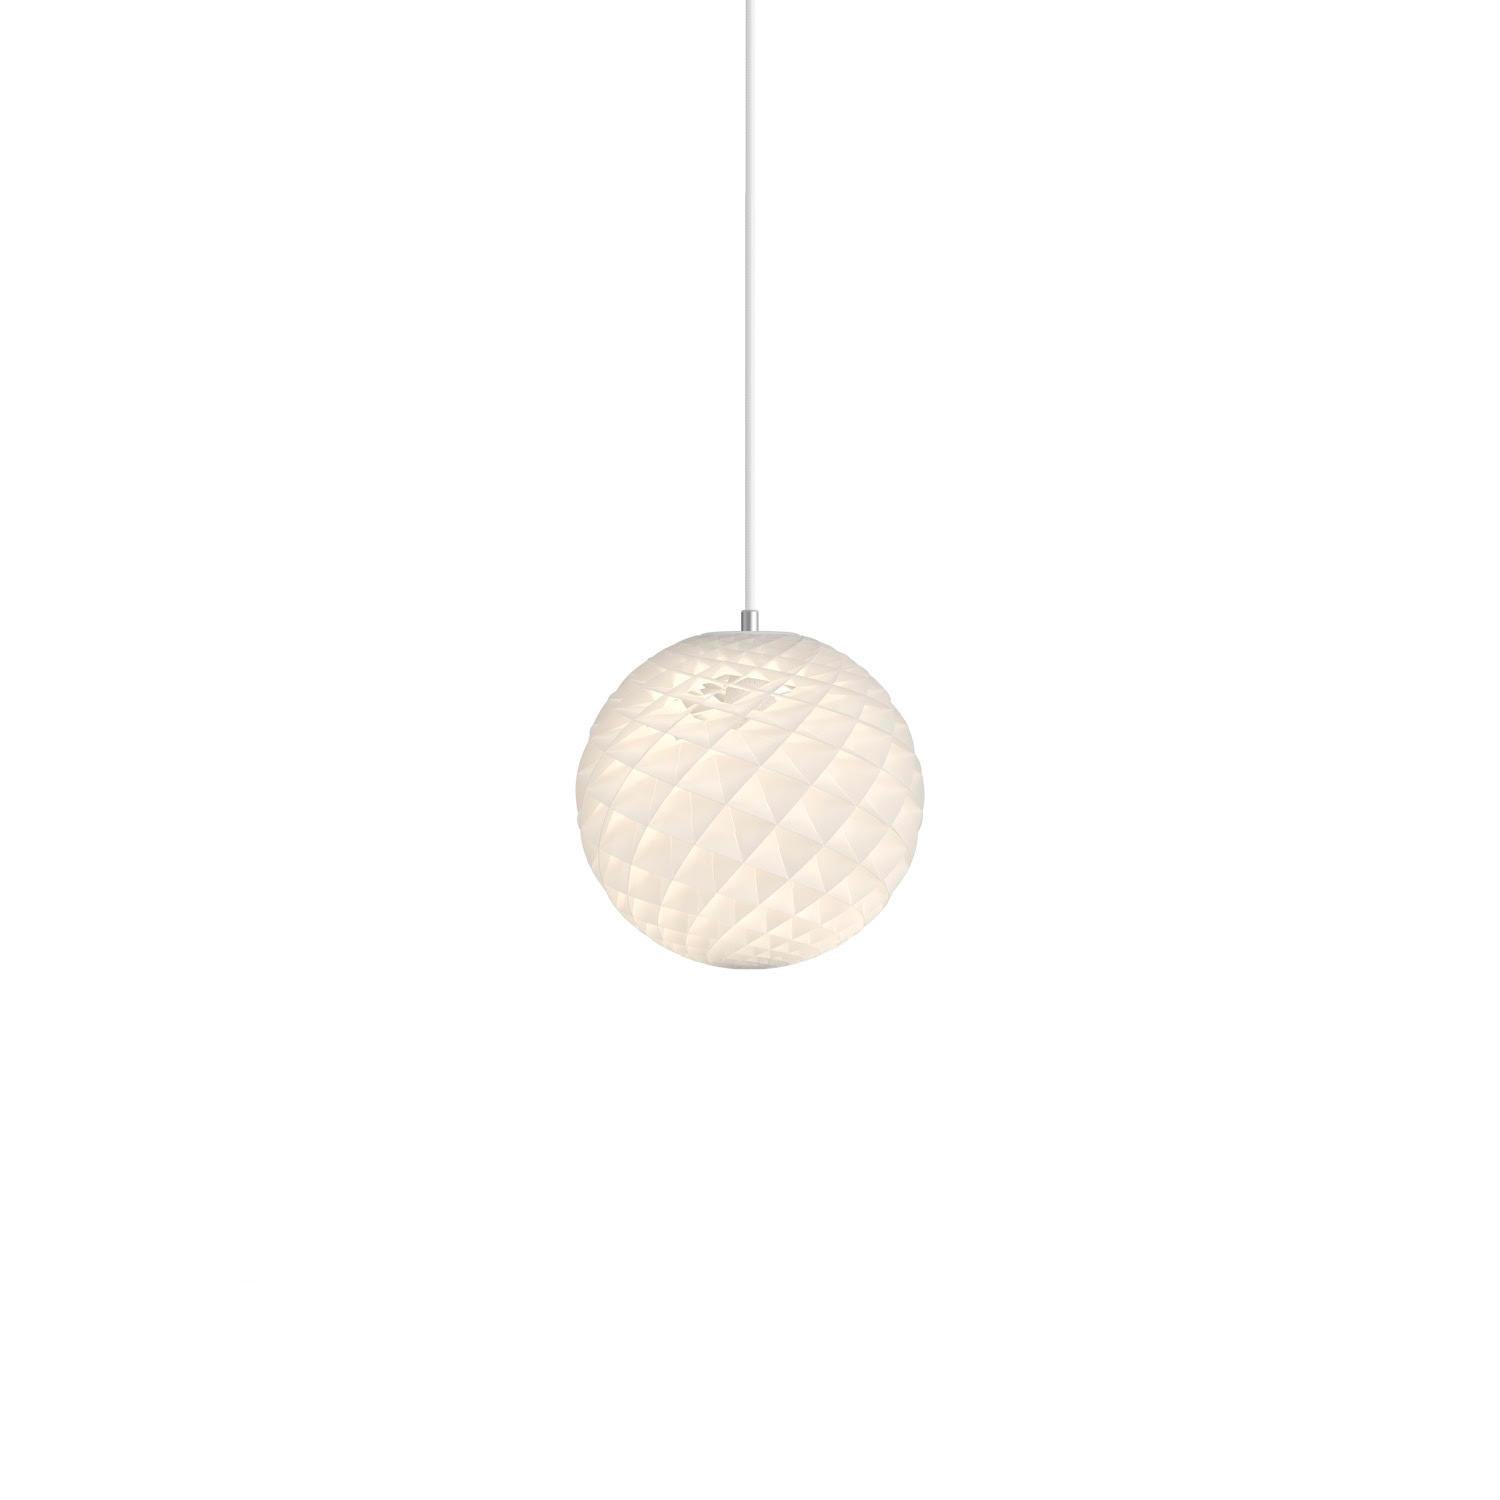 Louis Poulsen D300 Patere Round Chandelier

Patere Rond D300 Chandelier by Louis Poulsen
Patera is composed of a series of alveoli whose angles are carefully calculated to produce this incredible interaction between light and shadow. The shape of